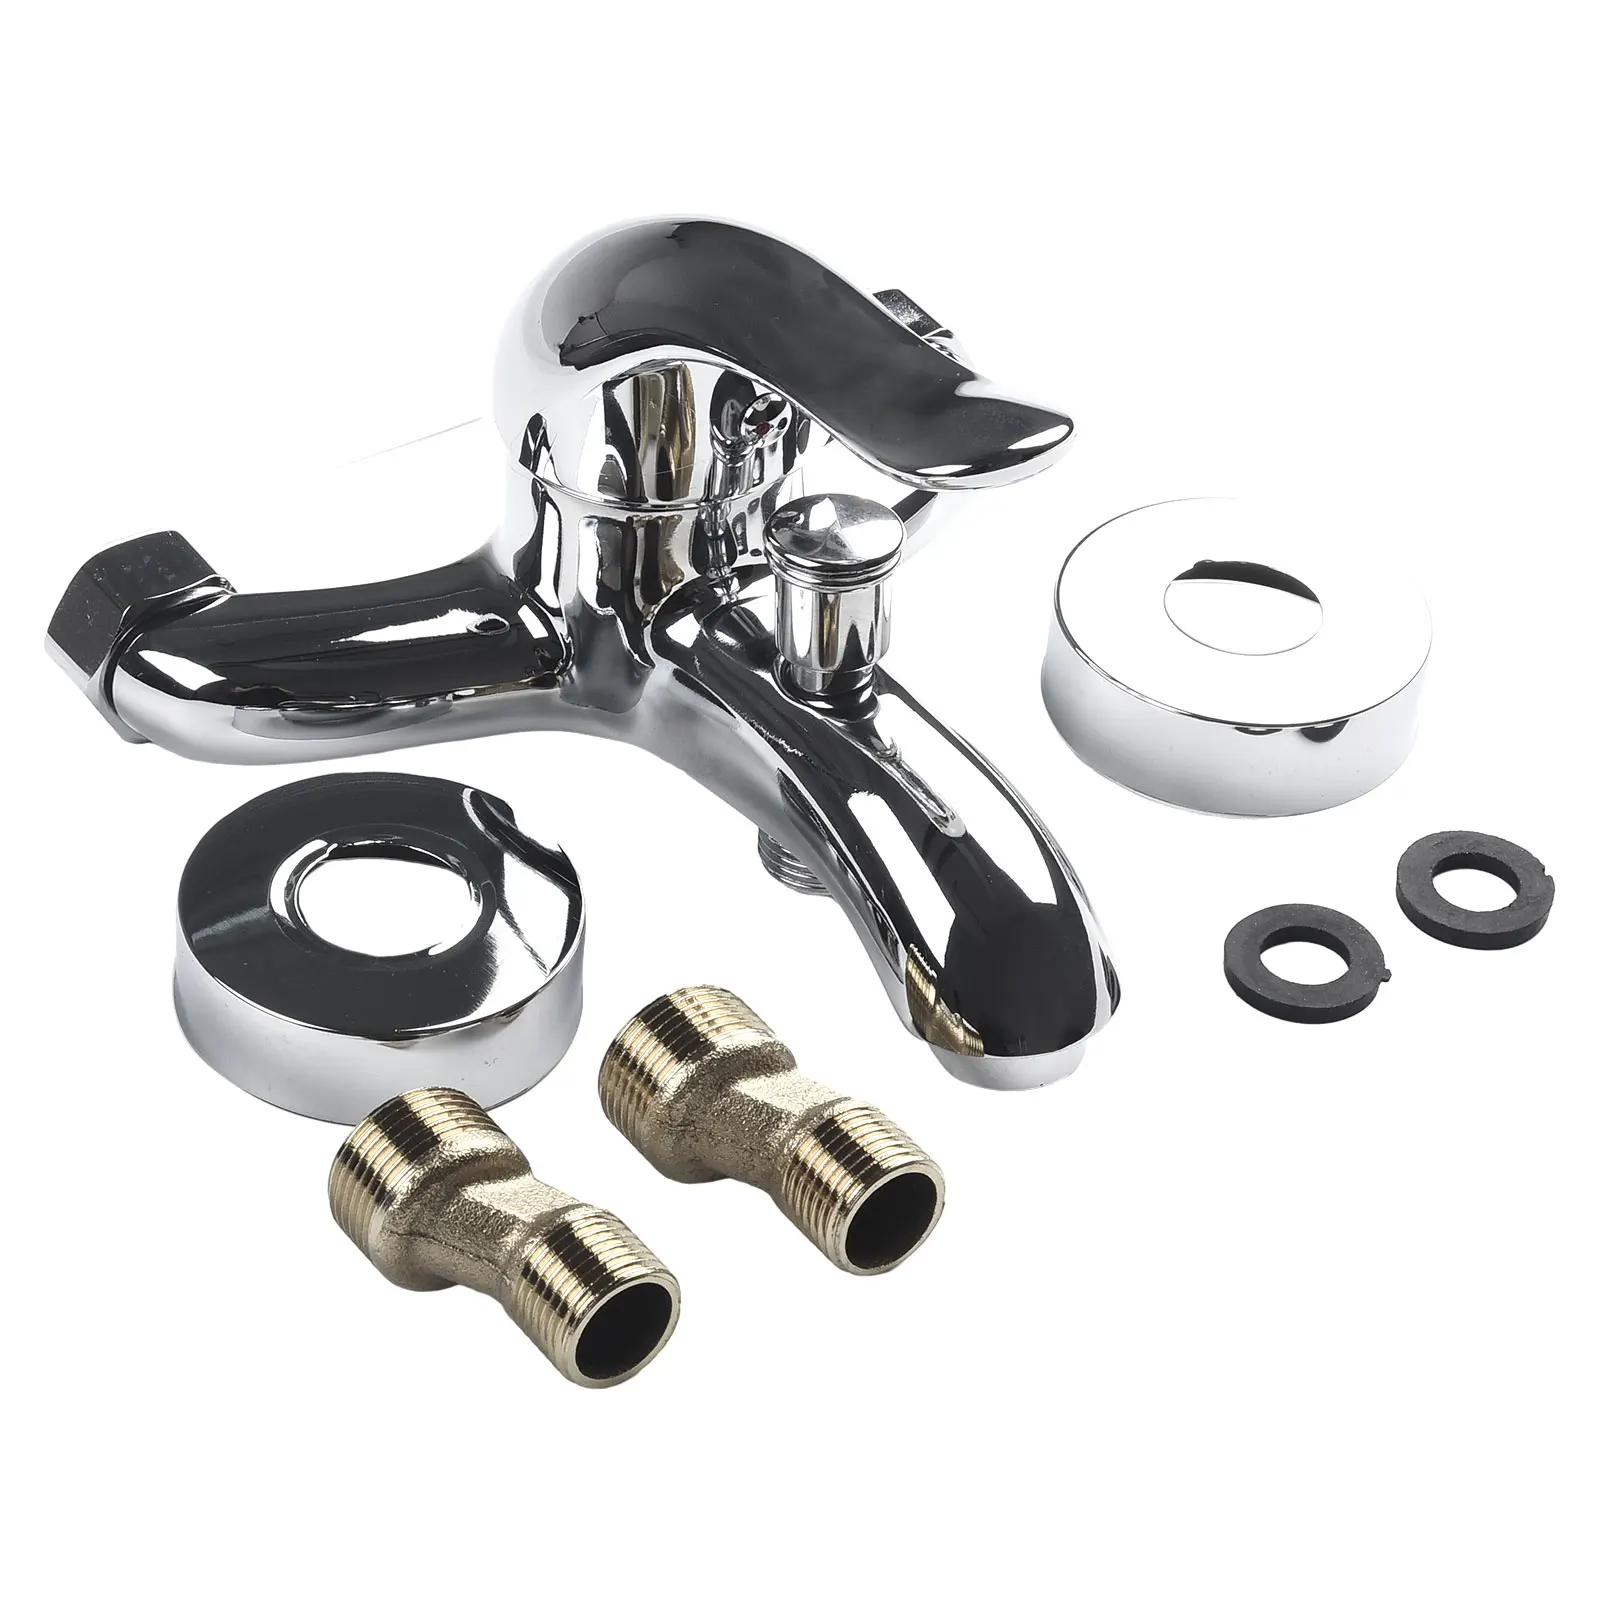 

Mixing Valve Basin Faucets Fittings Zinc Alloy Accessories Dual Spout Kits Set Silver Thermostats Wall Mounted